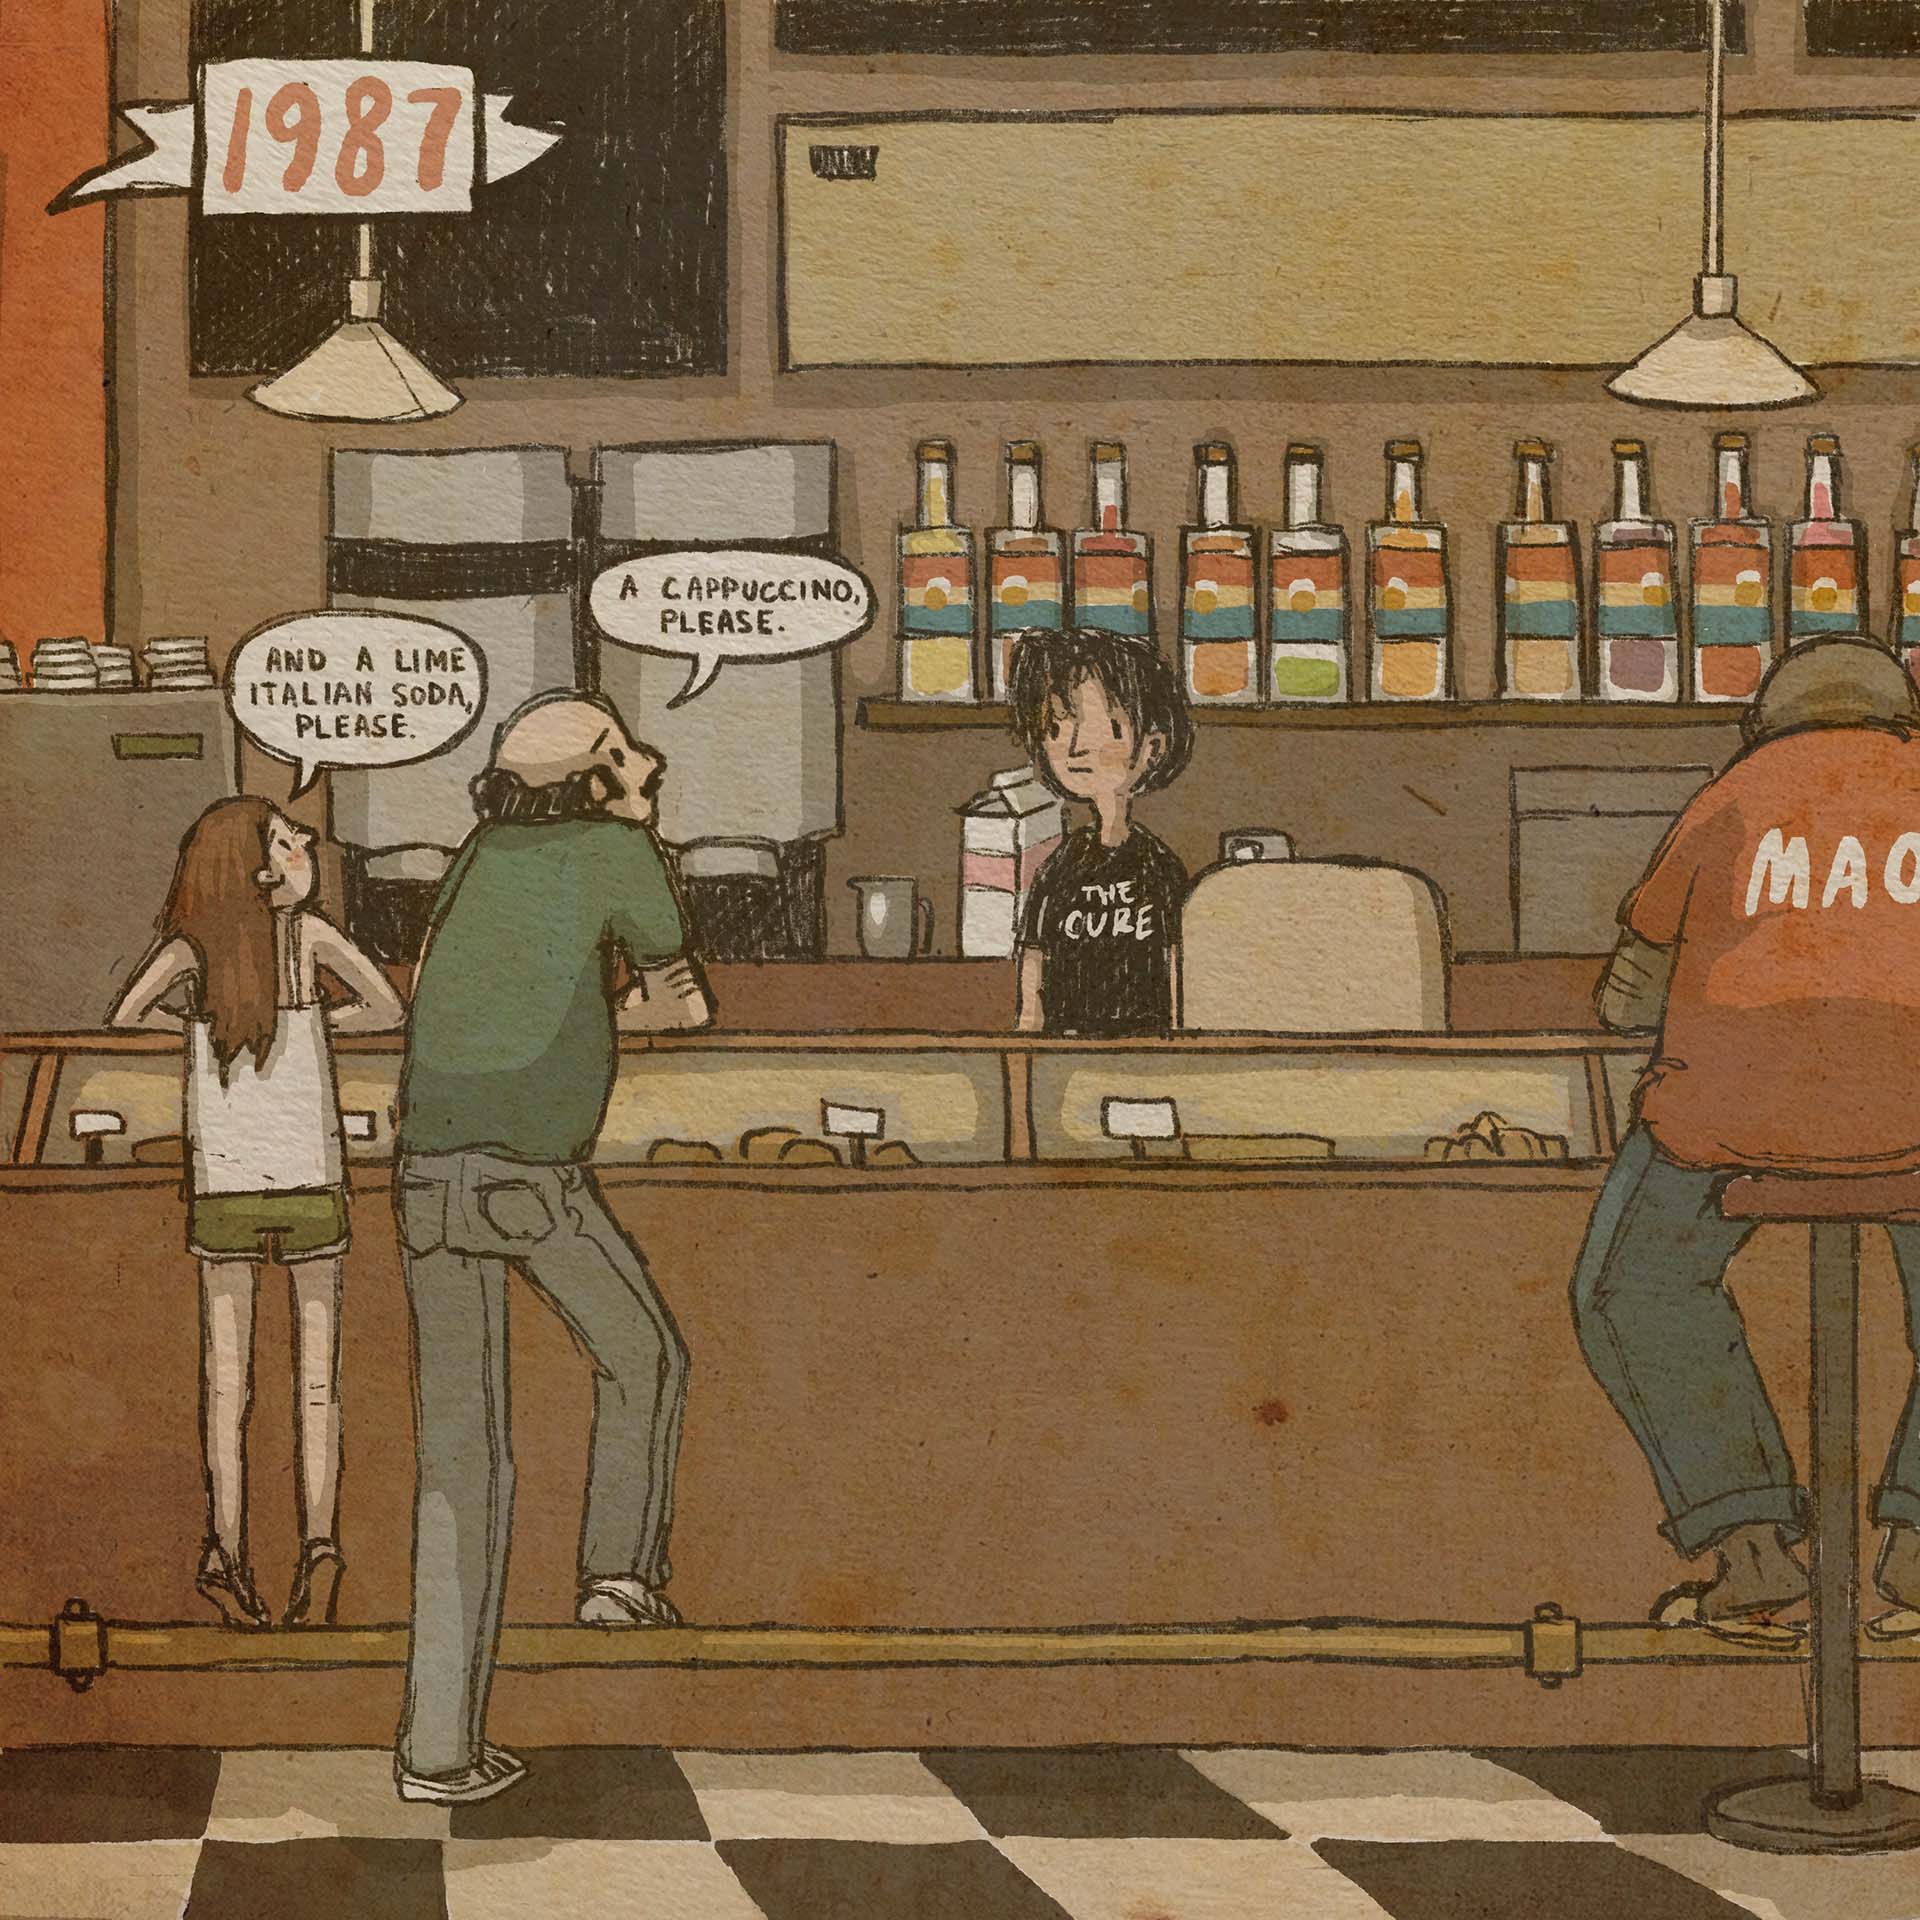 This panel is dated "1987." Balding father and young daughter order at the cafe counter where colorful flavored syrups are displayed in the back. The store employee is wearing a black t-shirt that says, "The Cure." "A cappuccino please," says the dad. "And a lime Italian soda, please," says the girl.